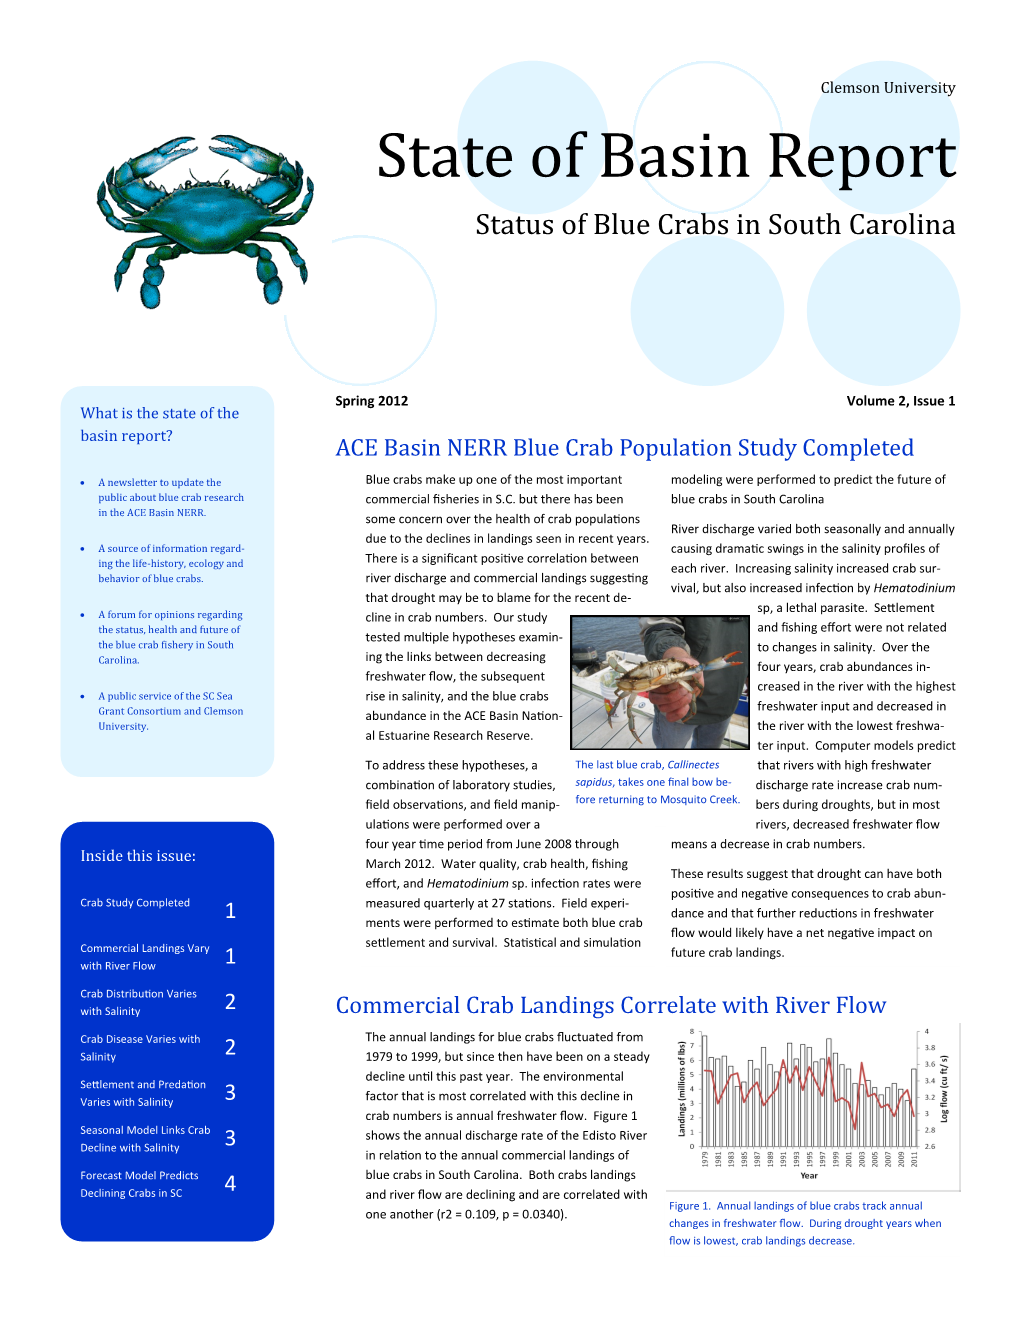 State of Basin Report Status of Blue Crabs in South Carolina